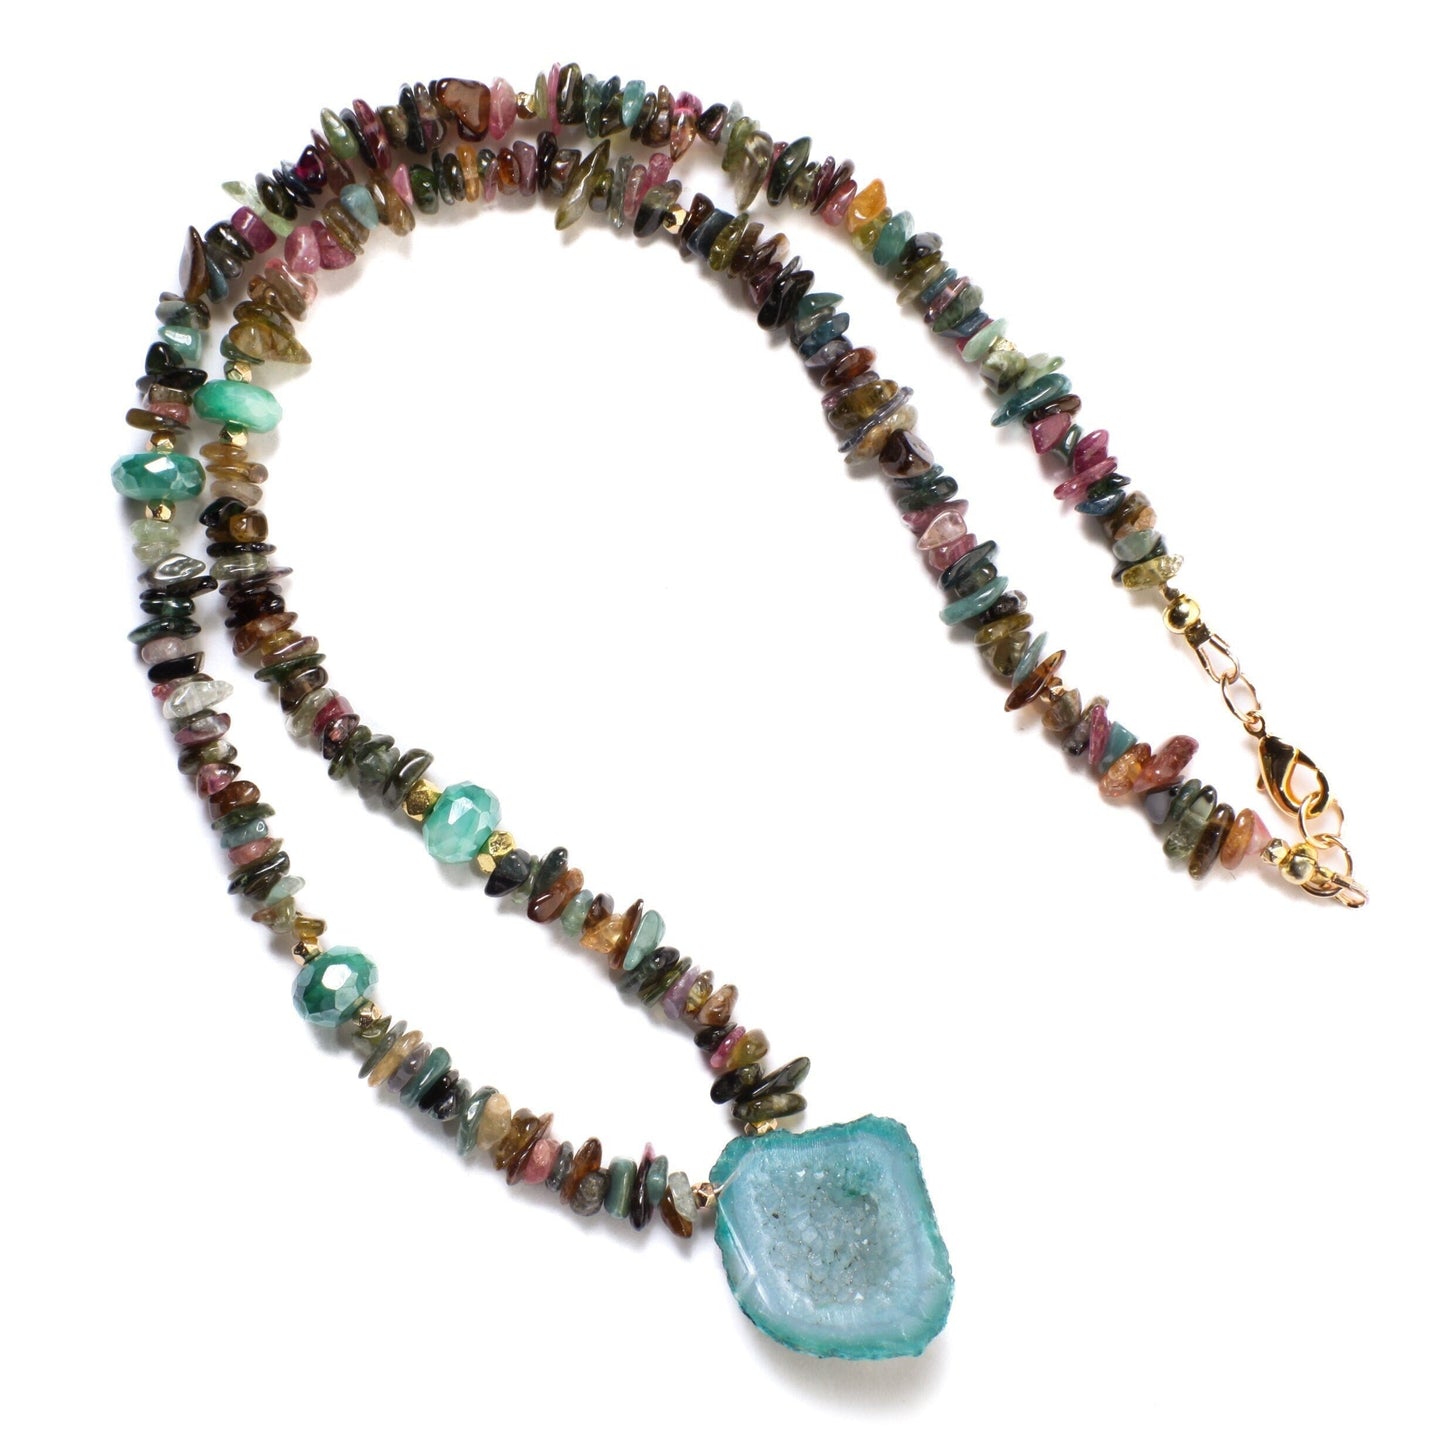 Watermelon Multi Tourmaline Raw Nugget chips, Faceted Green Moonstone Accents Beads, Druzy Agate Geode Gemstone Pendant 20.5&quot; Necklace